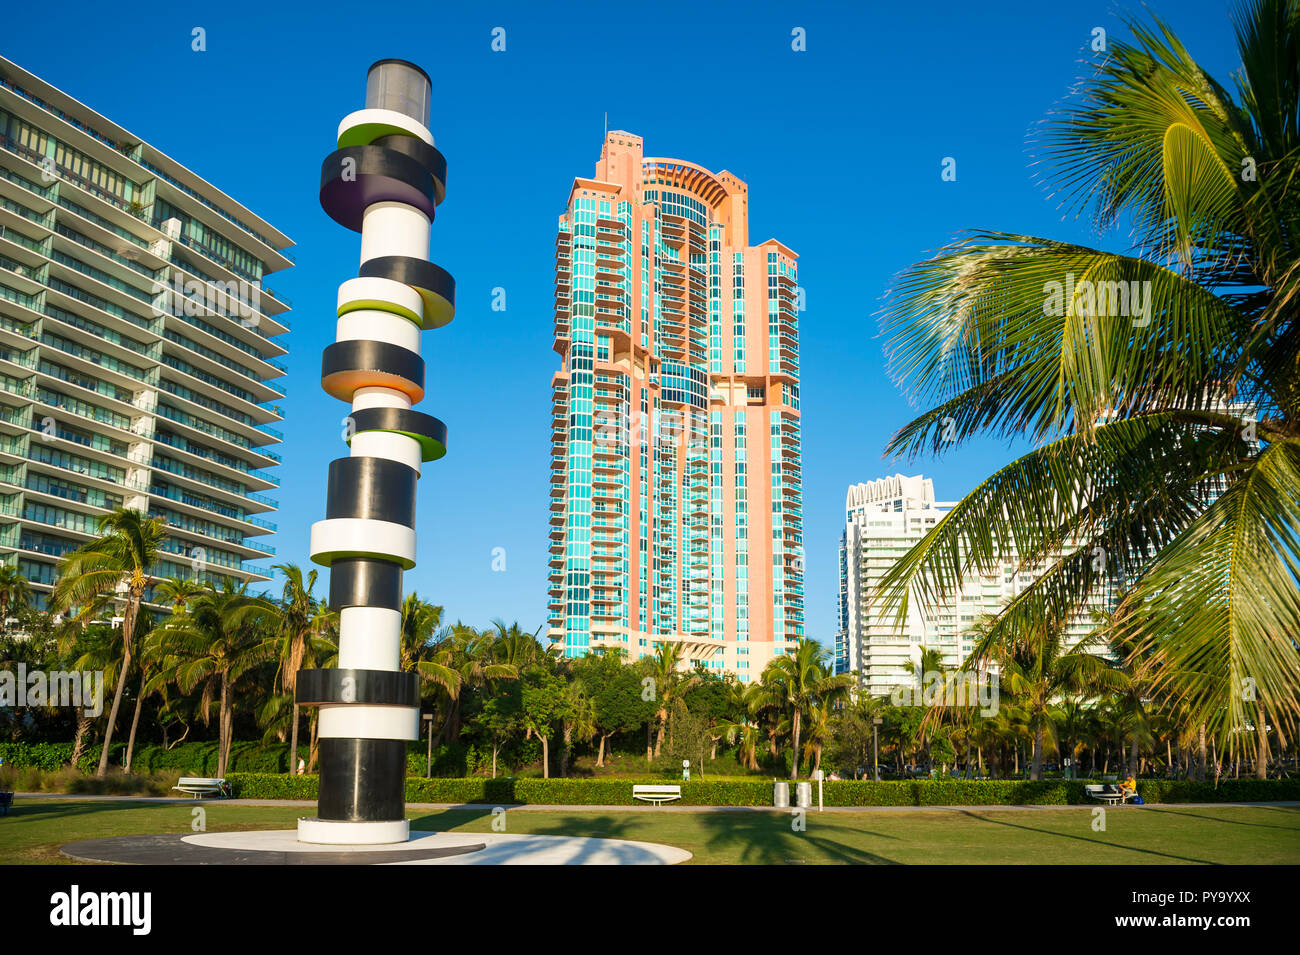 MIAMI - CIRCA SEPTEMBER, 2018: Obstinate Lighthouse, an installation by German artist Tobias Rehberger, stands amidst the condo towers at South Pointe Stock Photo